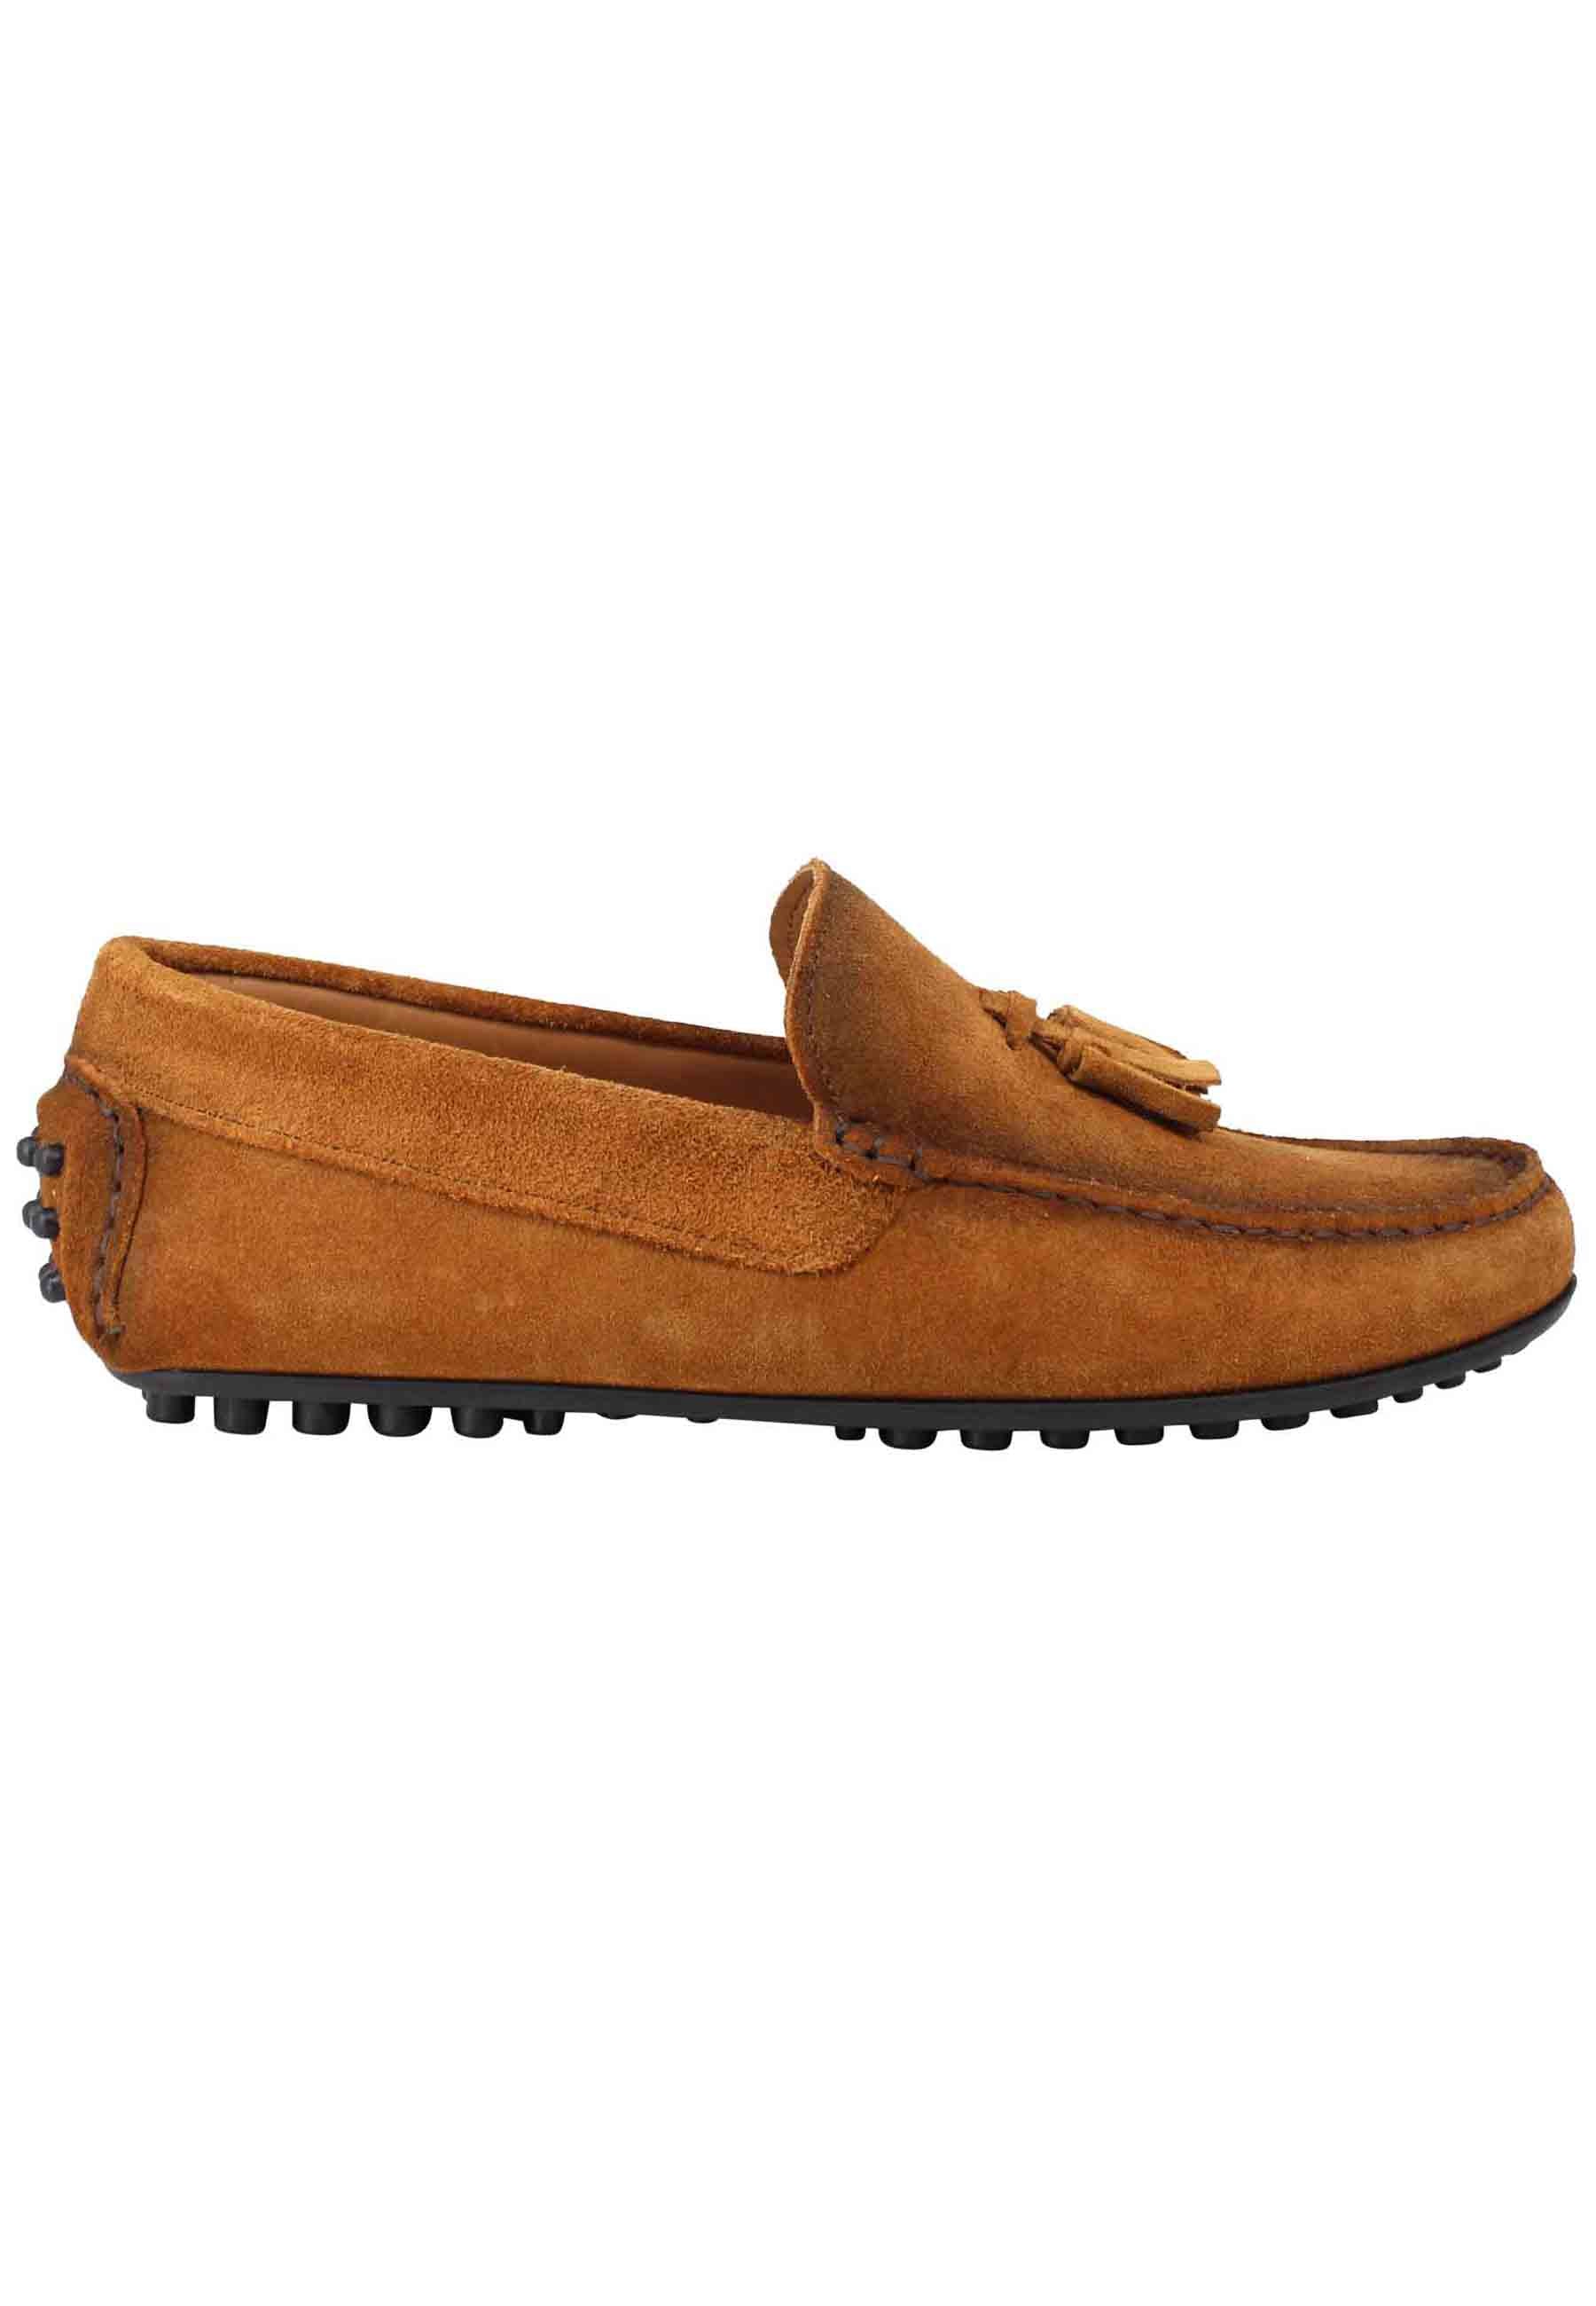 Men's moccasins in leather greased suede with rubber sole